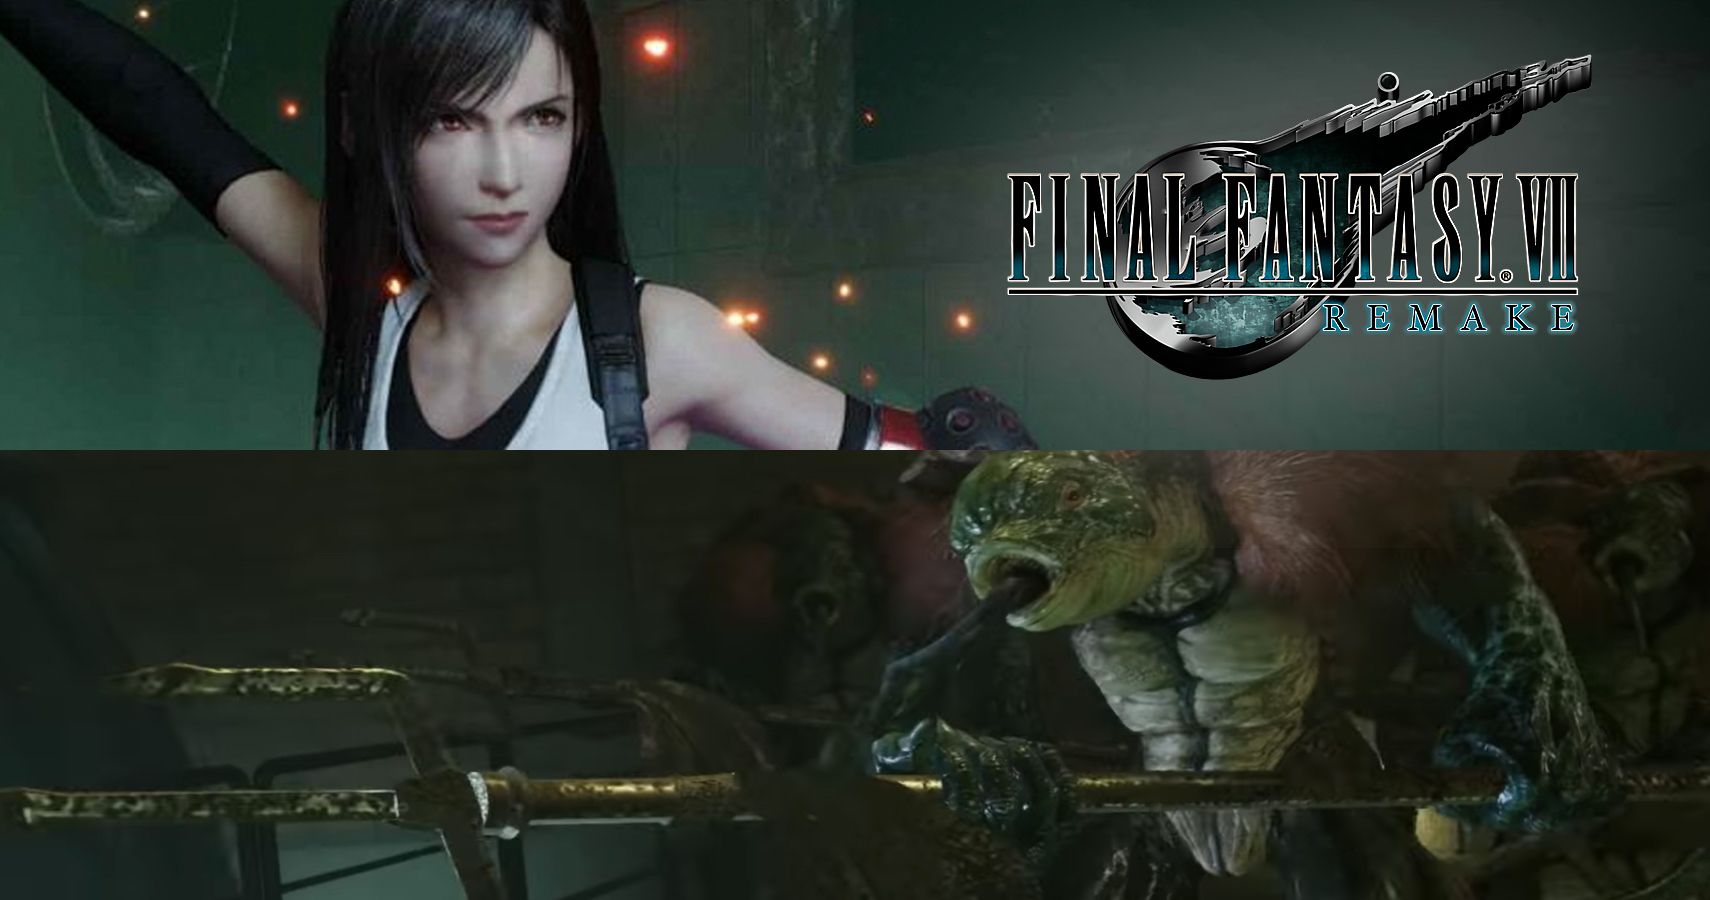 The Latest Final Fantasy VII Remake Trailer Shows Tifa In Action